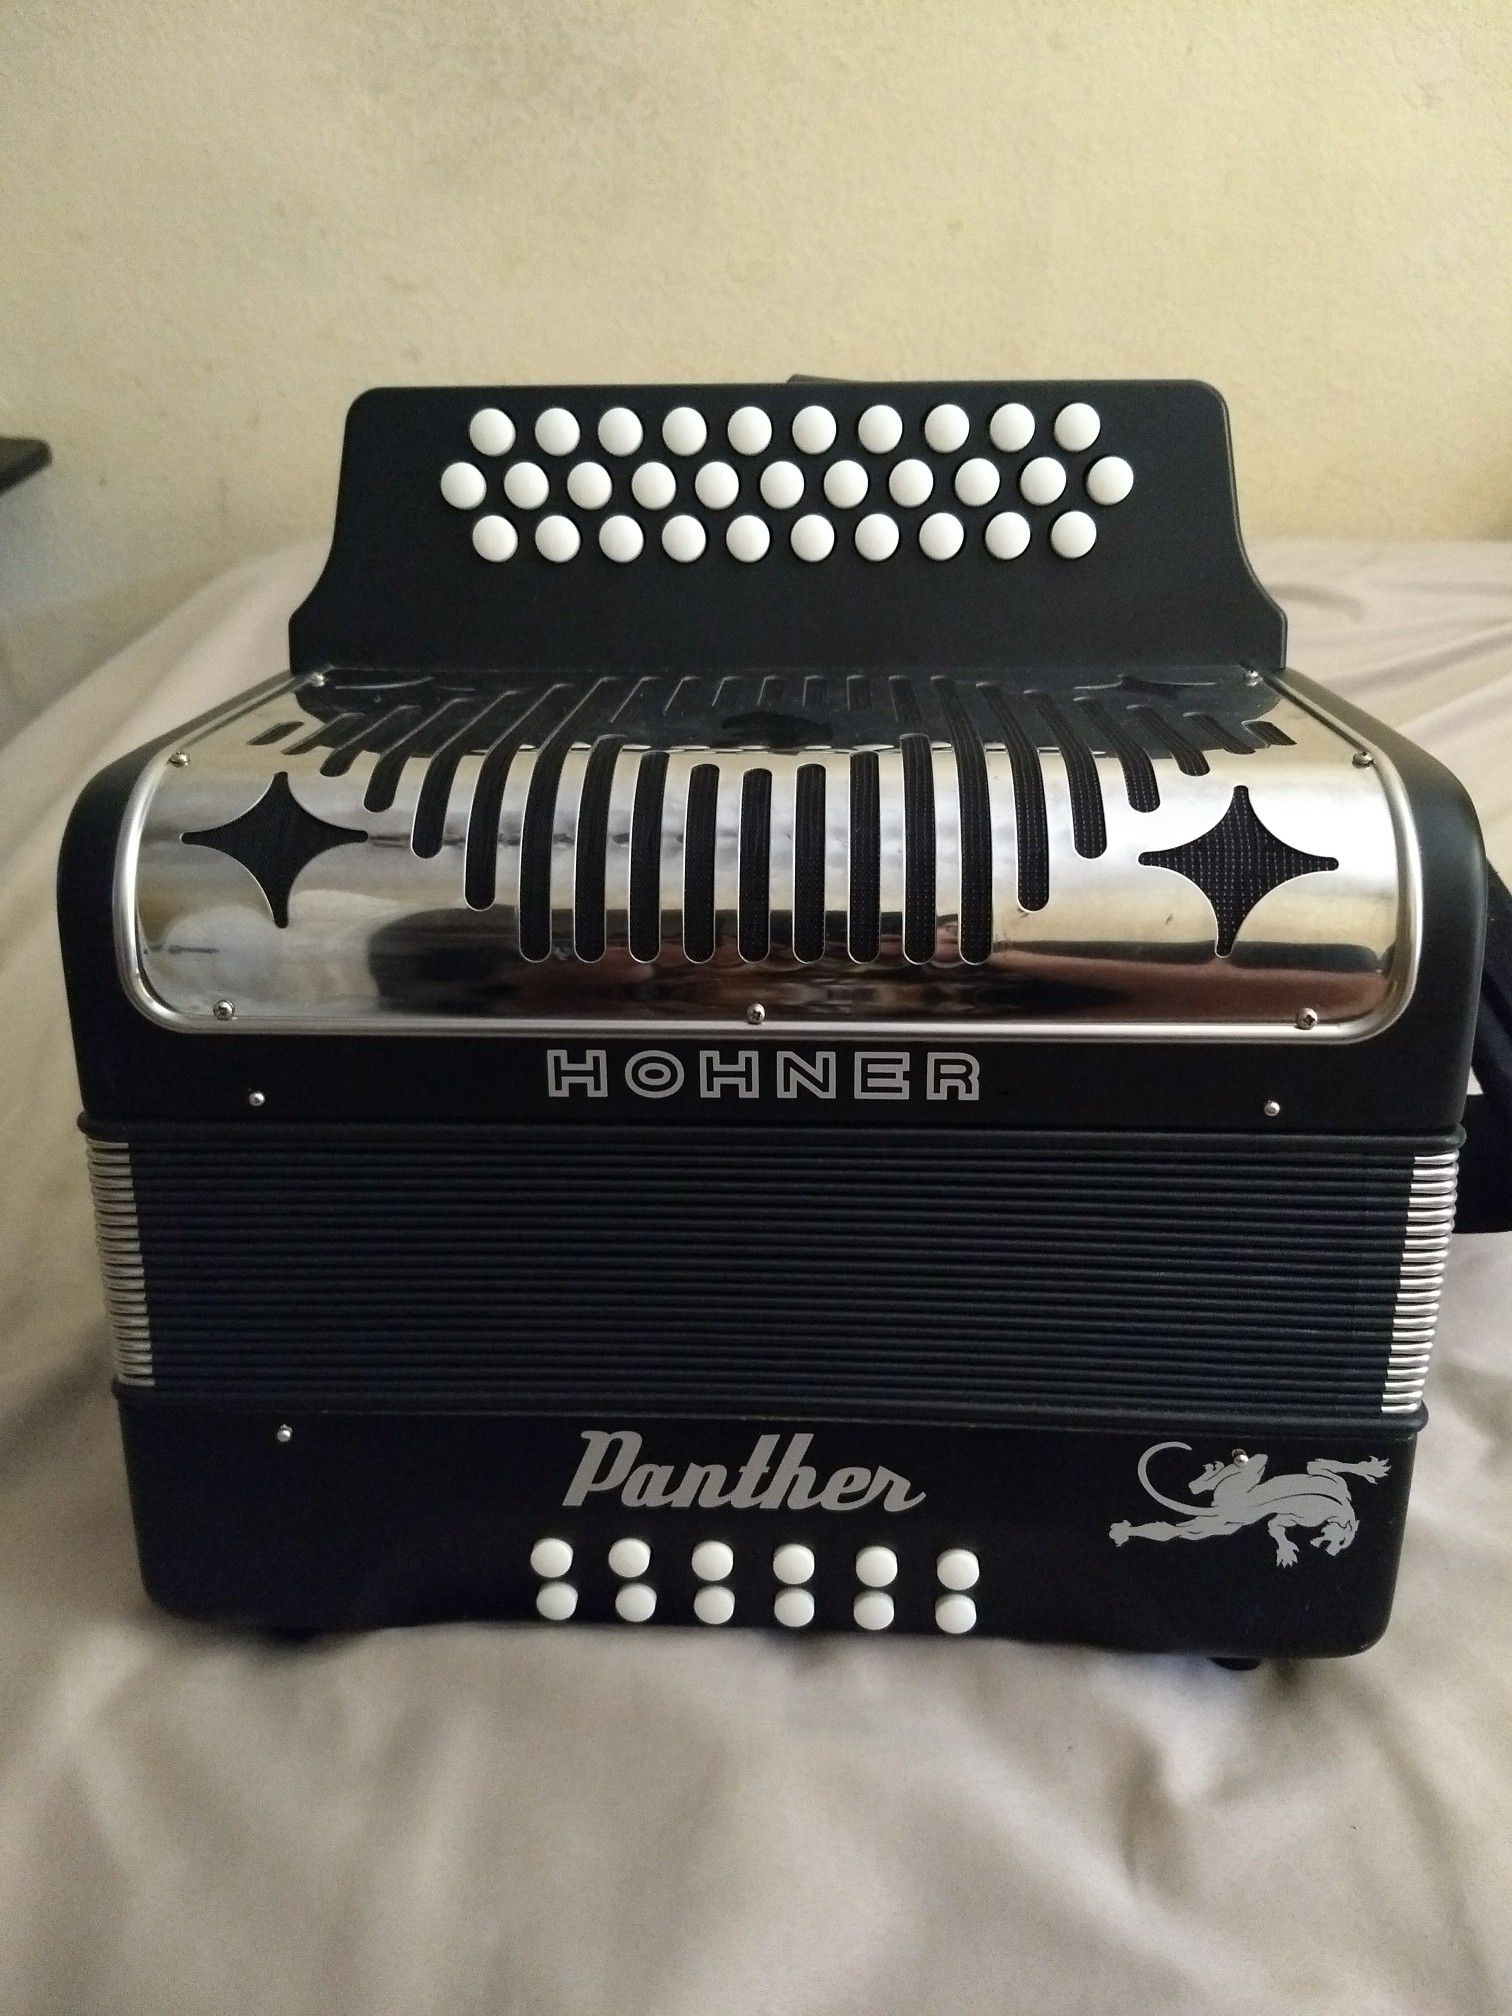 Acordeon Hohner Panther for Sale in McAllen, TX - OfferUp